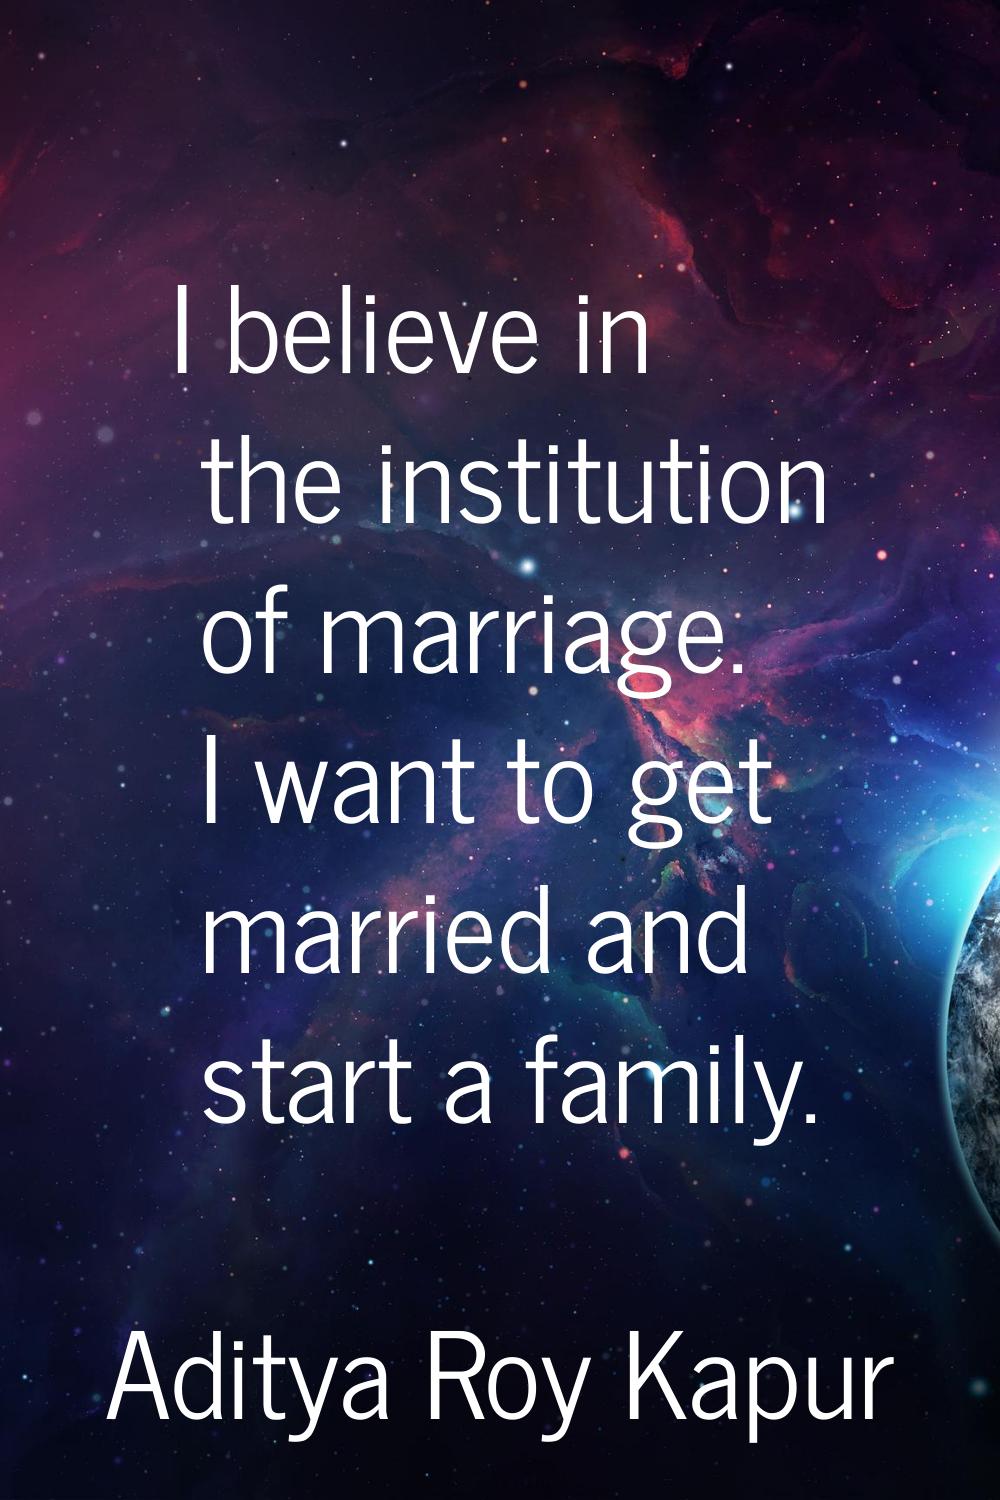 I believe in the institution of marriage. I want to get married and start a family.